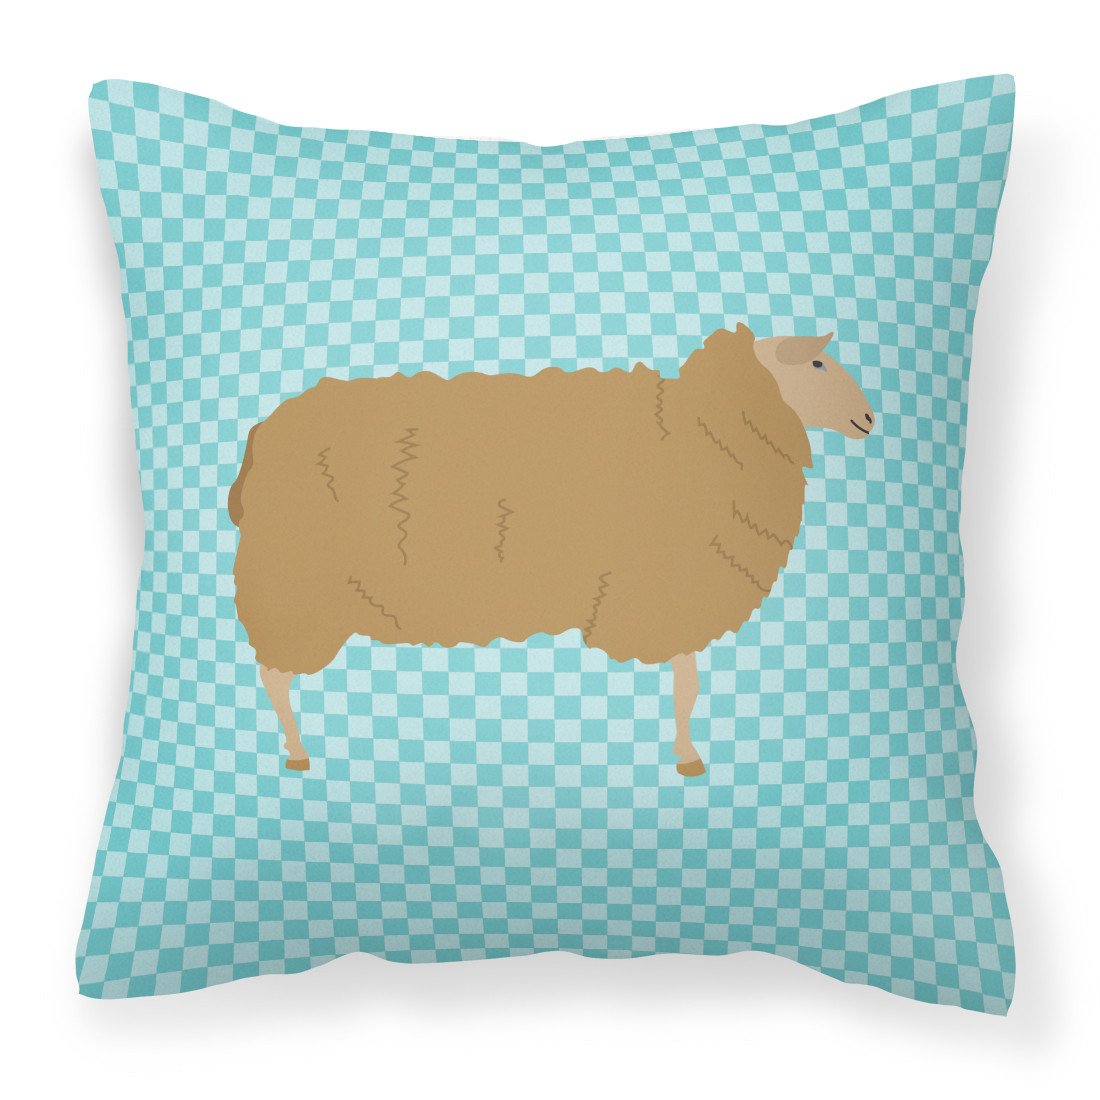 East Friesian Sheep Blue Check Fabric Decorative Pillow BB8151PW1818 by Caroline's Treasures